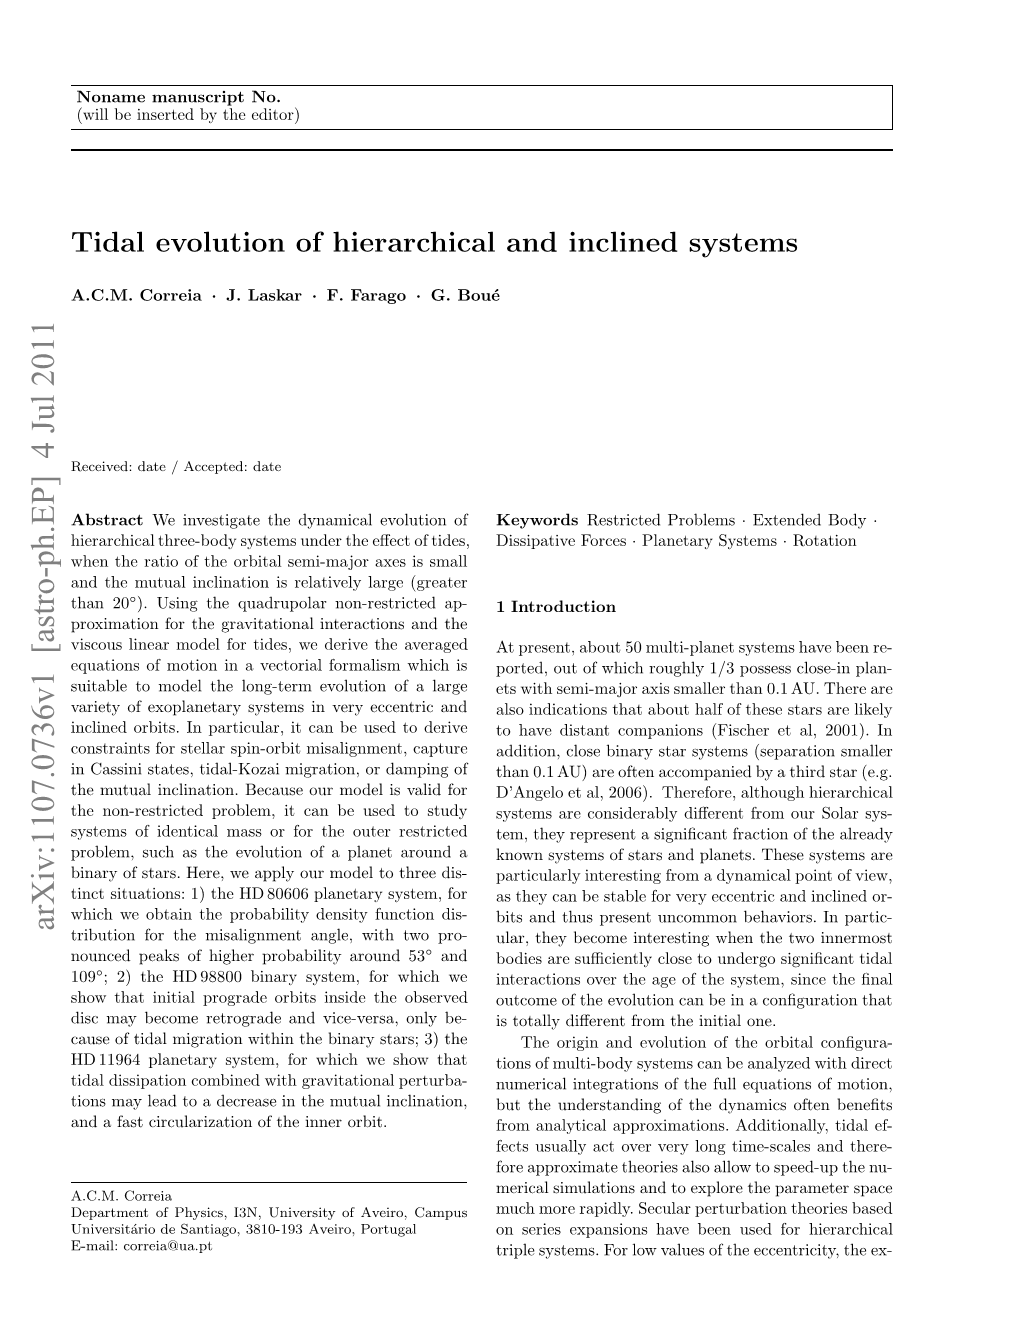 Tidal Evolution of Hierarchical and Inclined Systems 3